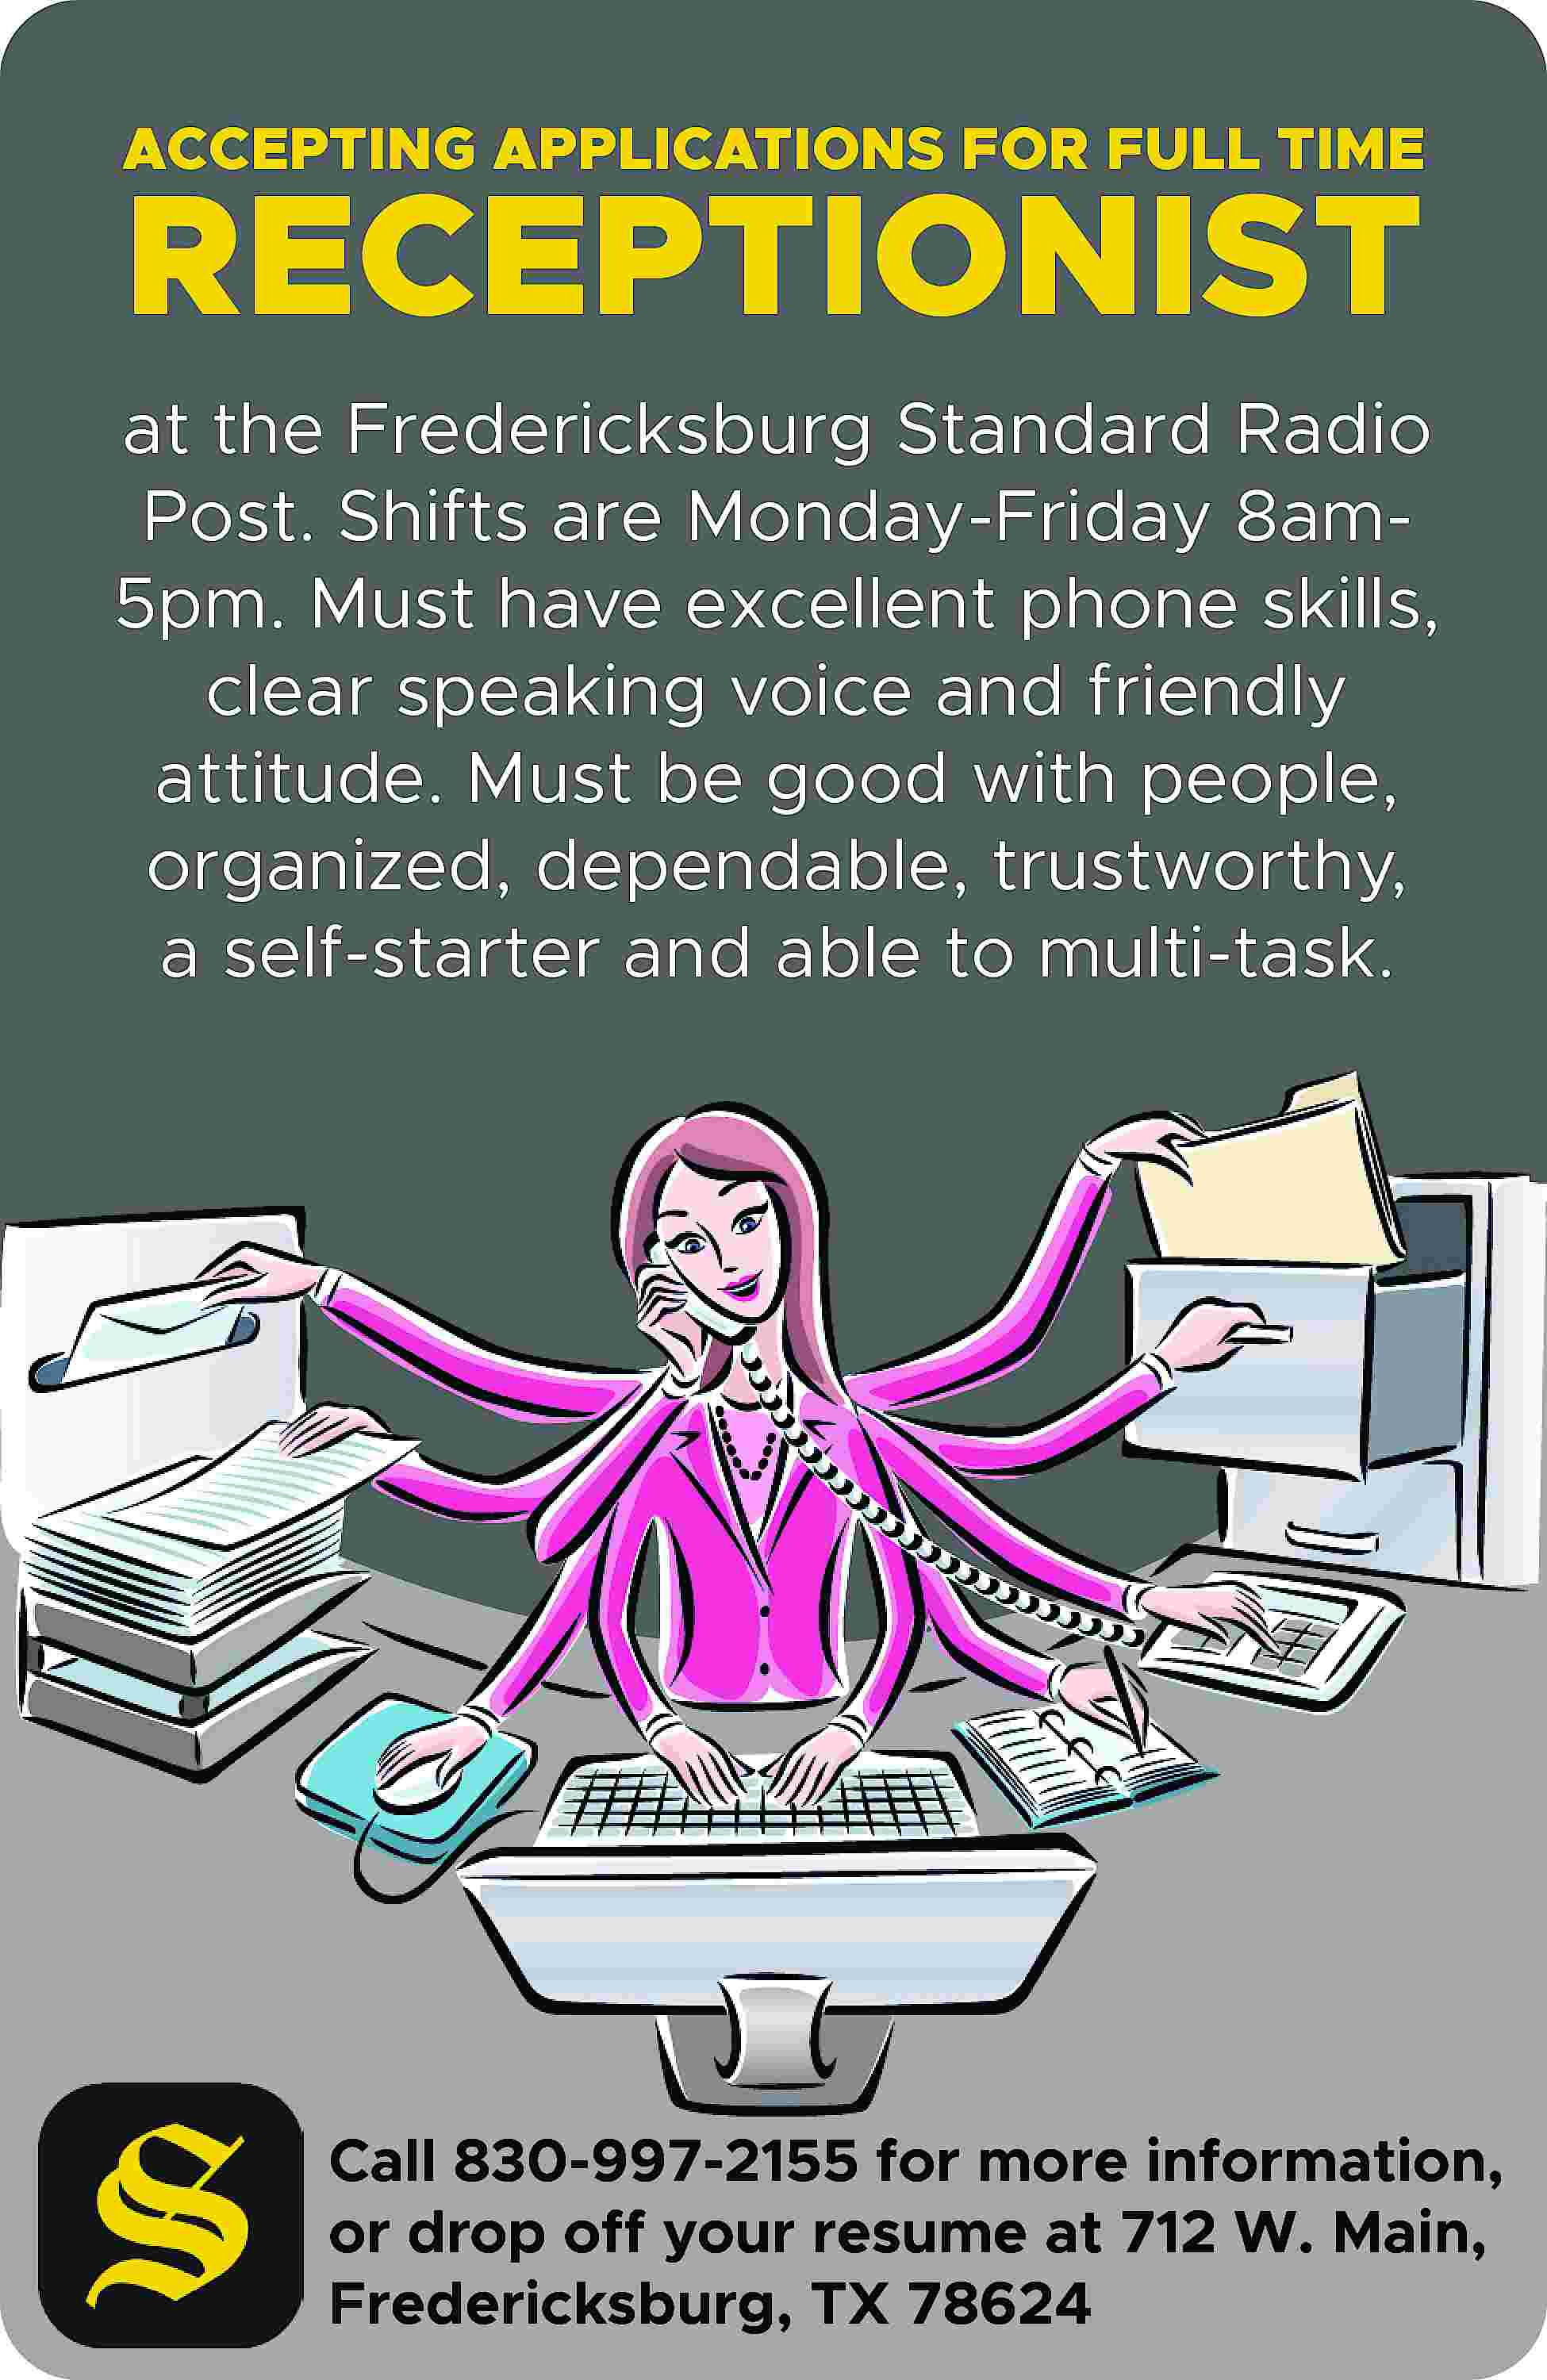 ACCEPTING APPLICATIONS FOR FULL TIME  ACCEPTING APPLICATIONS FOR FULL TIME RECEPTIONIST at the Fredericksburg Standard Radio Post. Shifts are Monday-Friday 8am5pm. Must have excellent phone skills, clear speaking voice and friendly attitude. Must be good with people, organized, dependable, trustworthy, a self-starter and able to multi-task. Call 830-997-2155 for more information, or drop off your resume at 712 W. Main, Fredericksburg, TX 78624